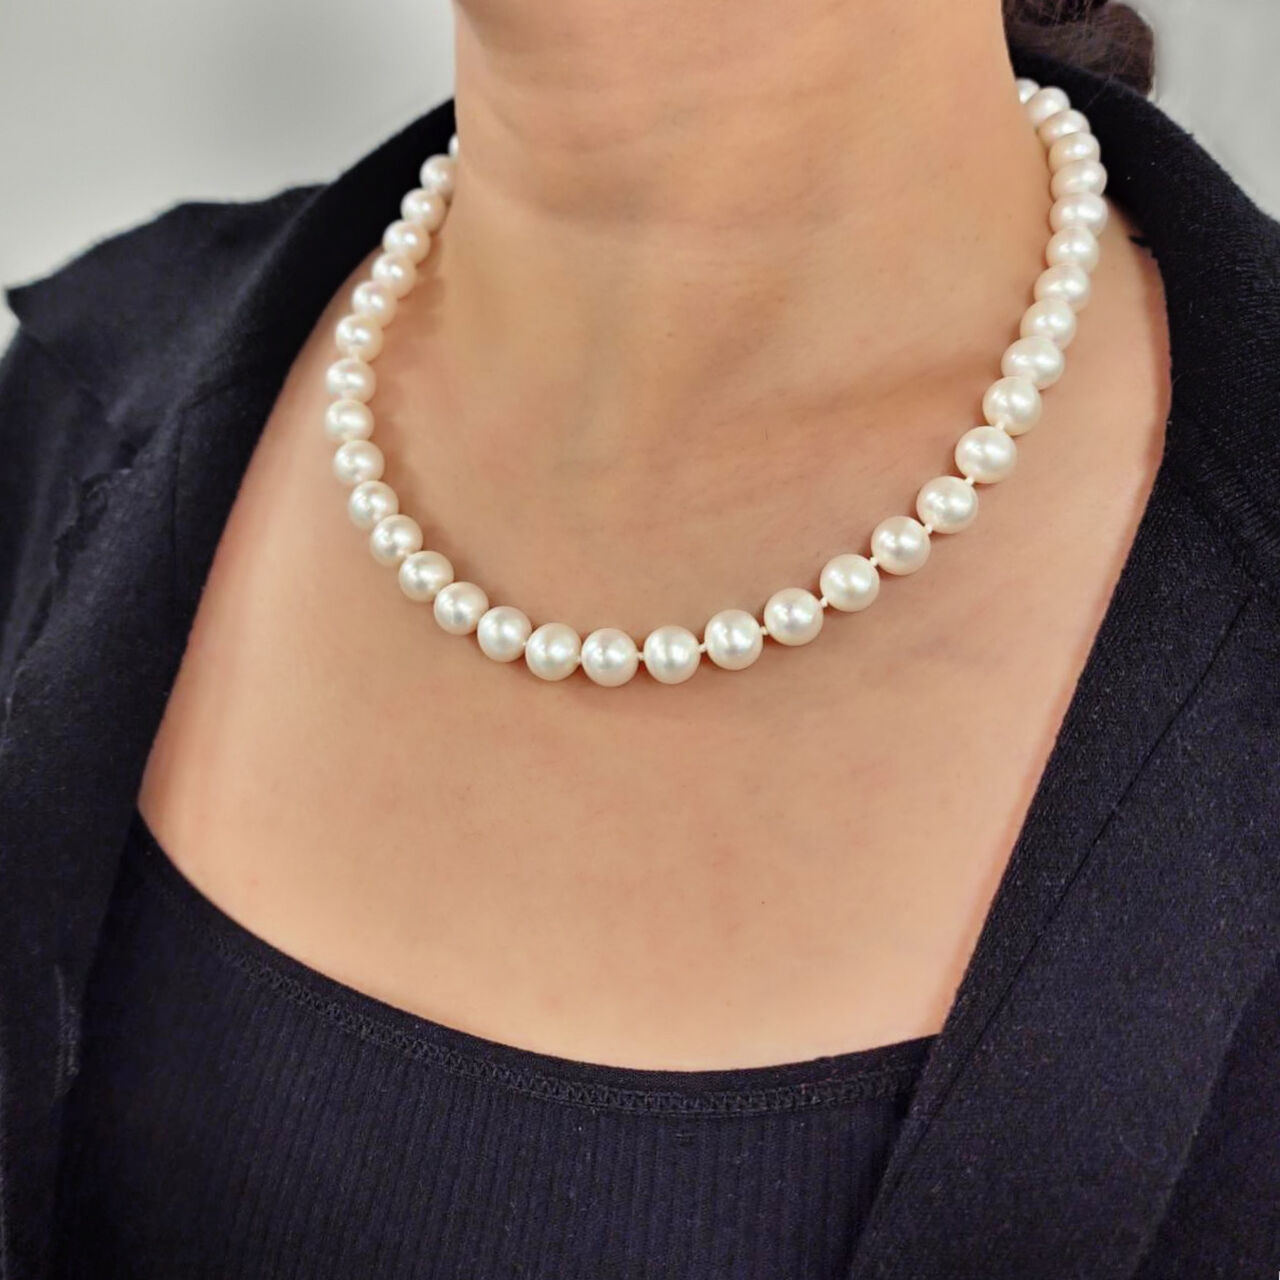 Freshwater Pearl Necklace - 8-10mm